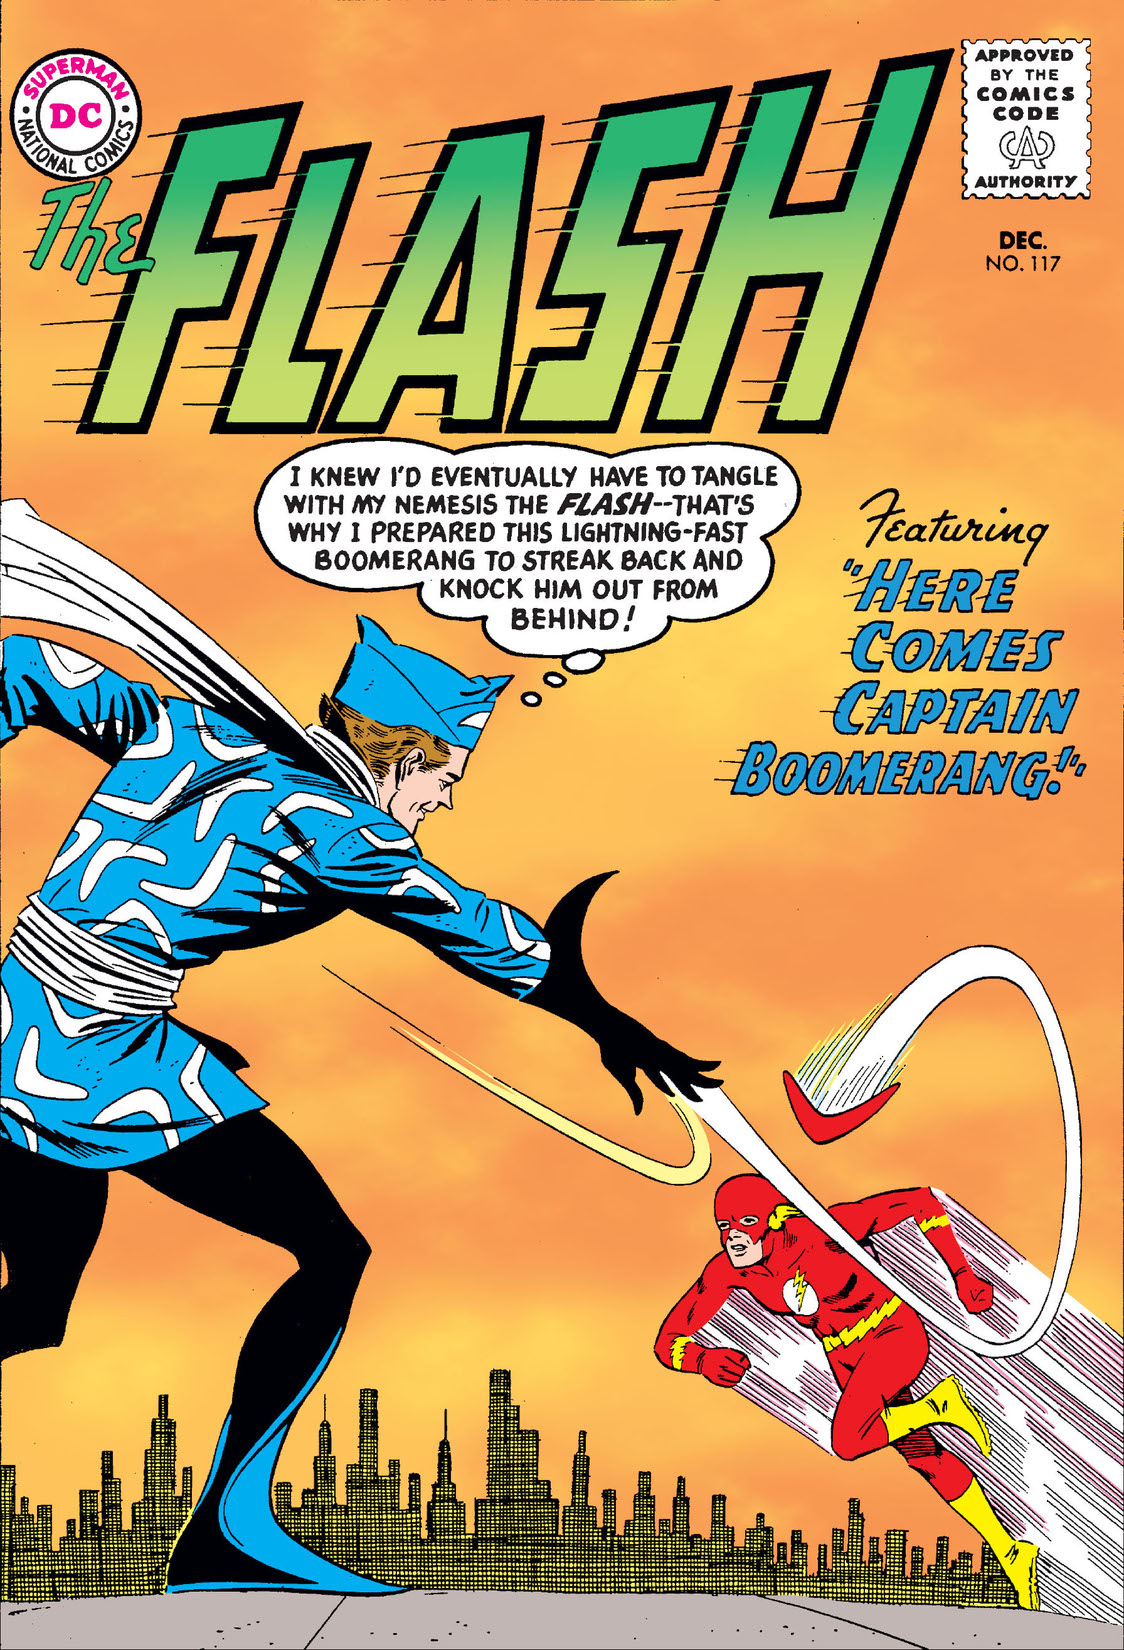 The Flash (1959-) #117 preview images